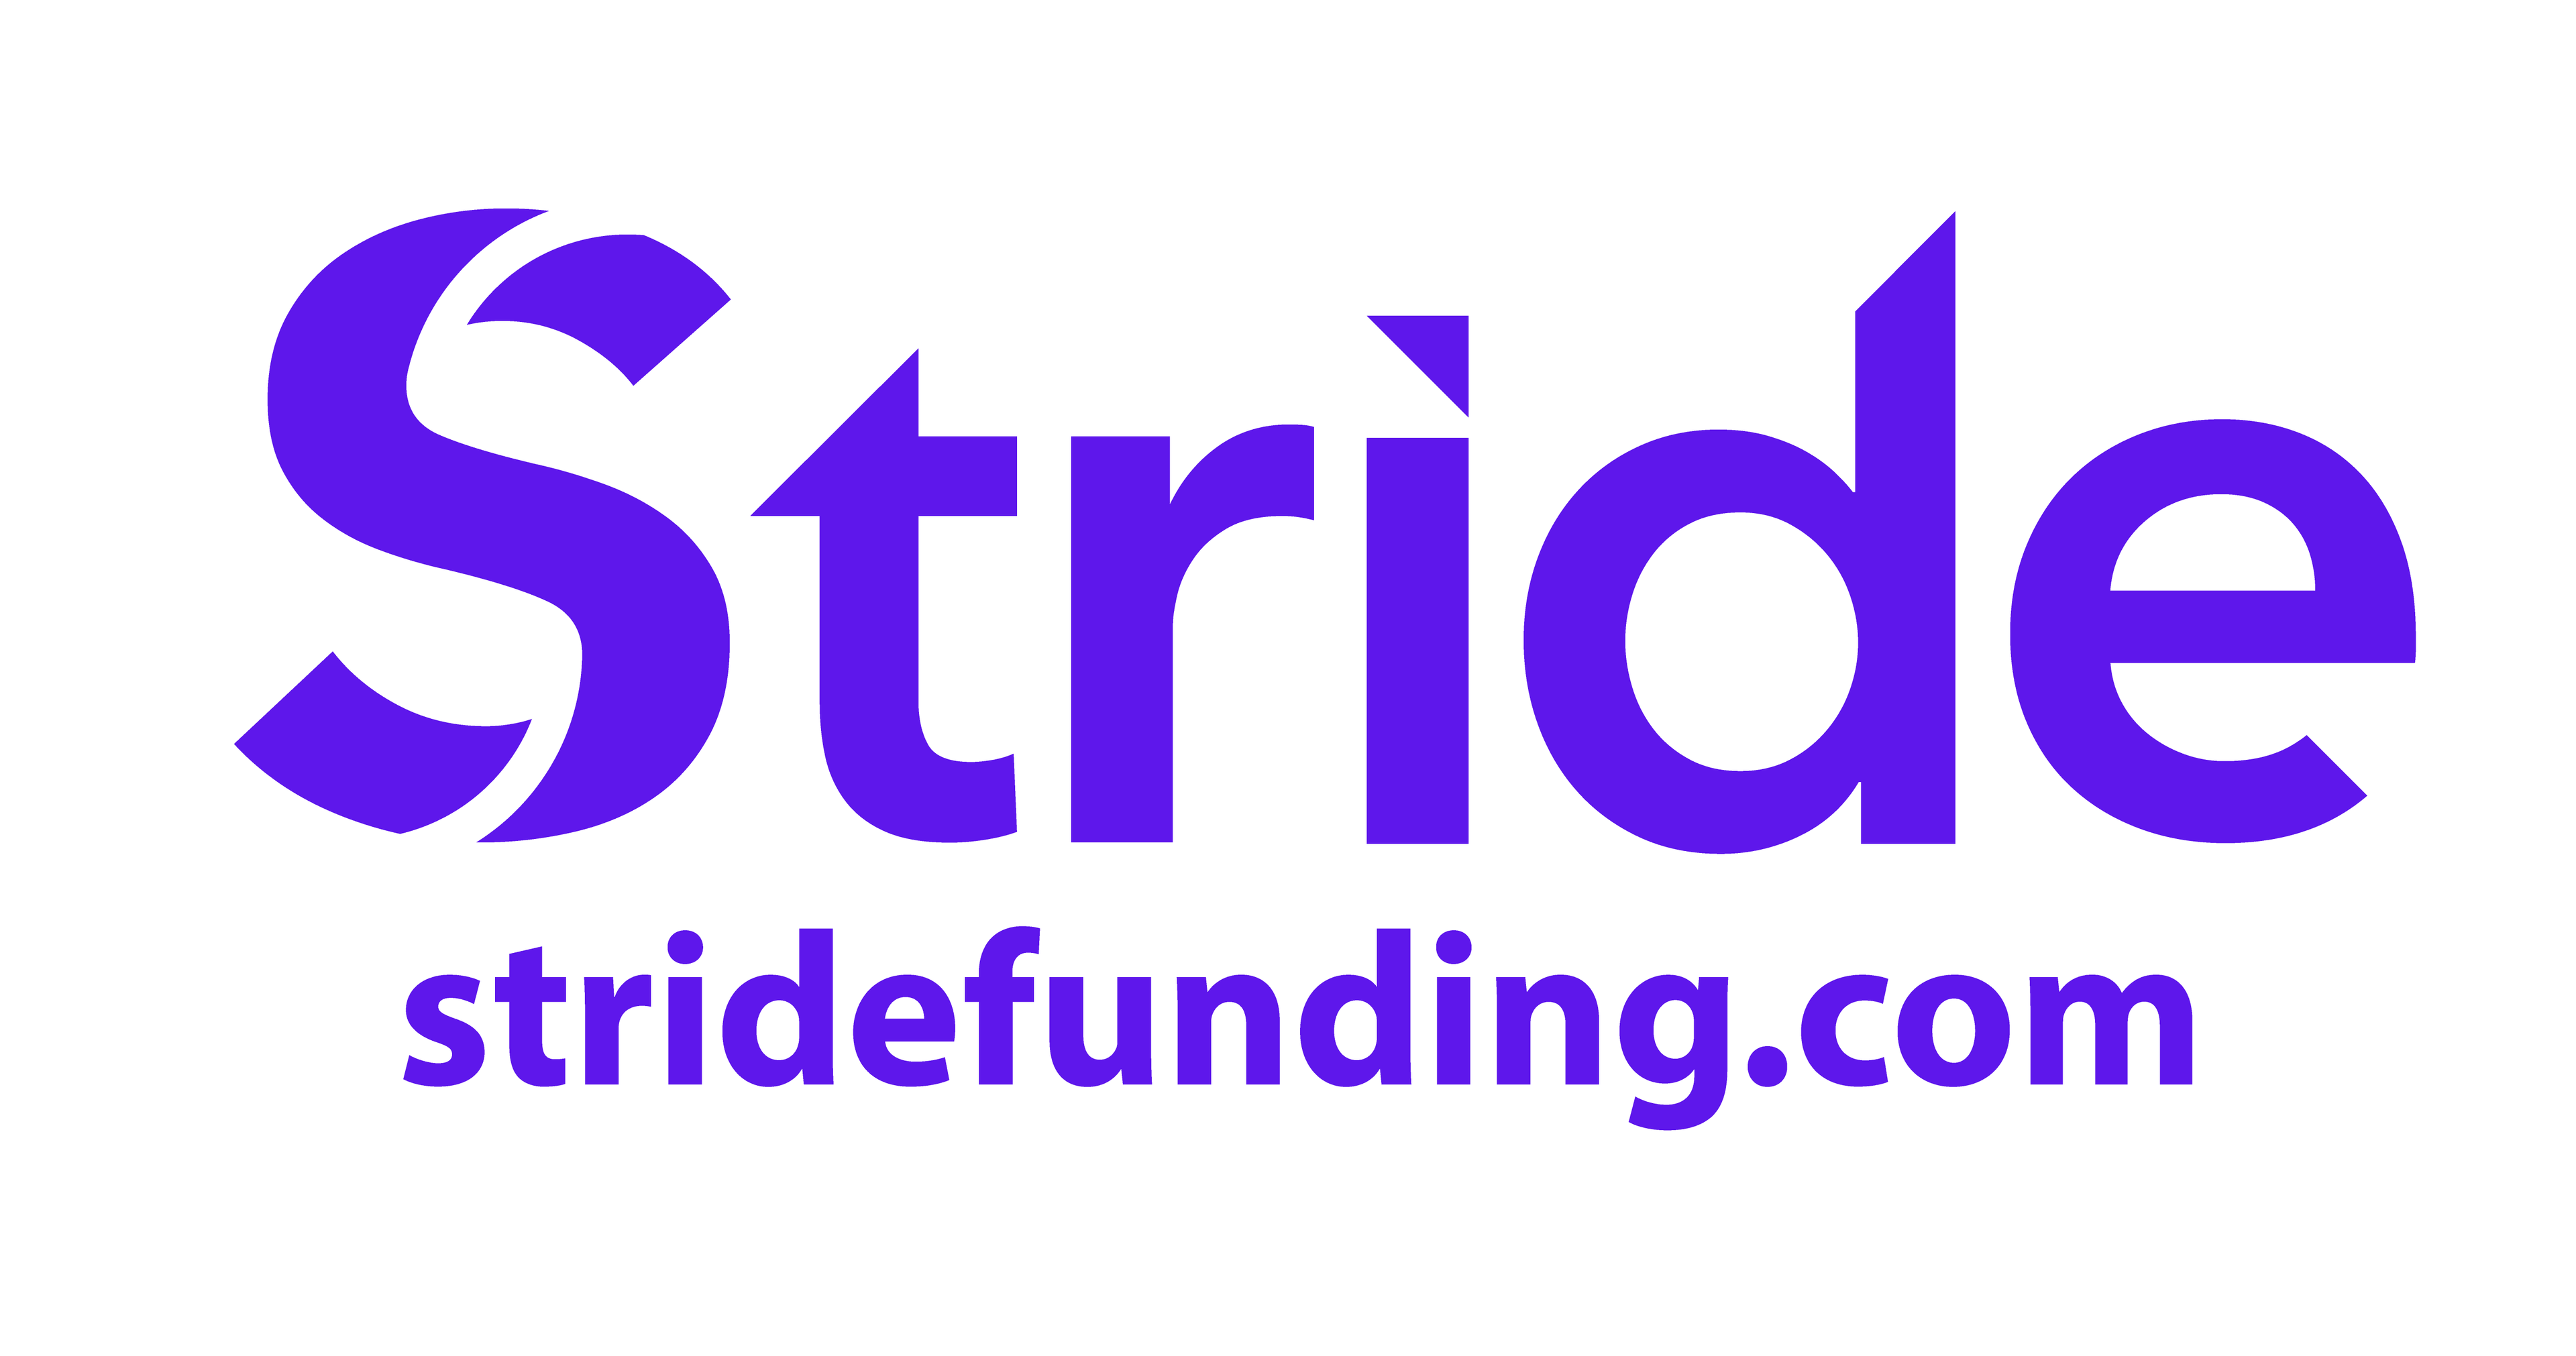 For any questions at all—though we may direct you to Launch for questions related directly to your payment portal or account servicing.

https://www.stridefunding.com
(214) 775-9960
8 AM – 8 PM EST Monday – Friday
support@stridefunding.com icon